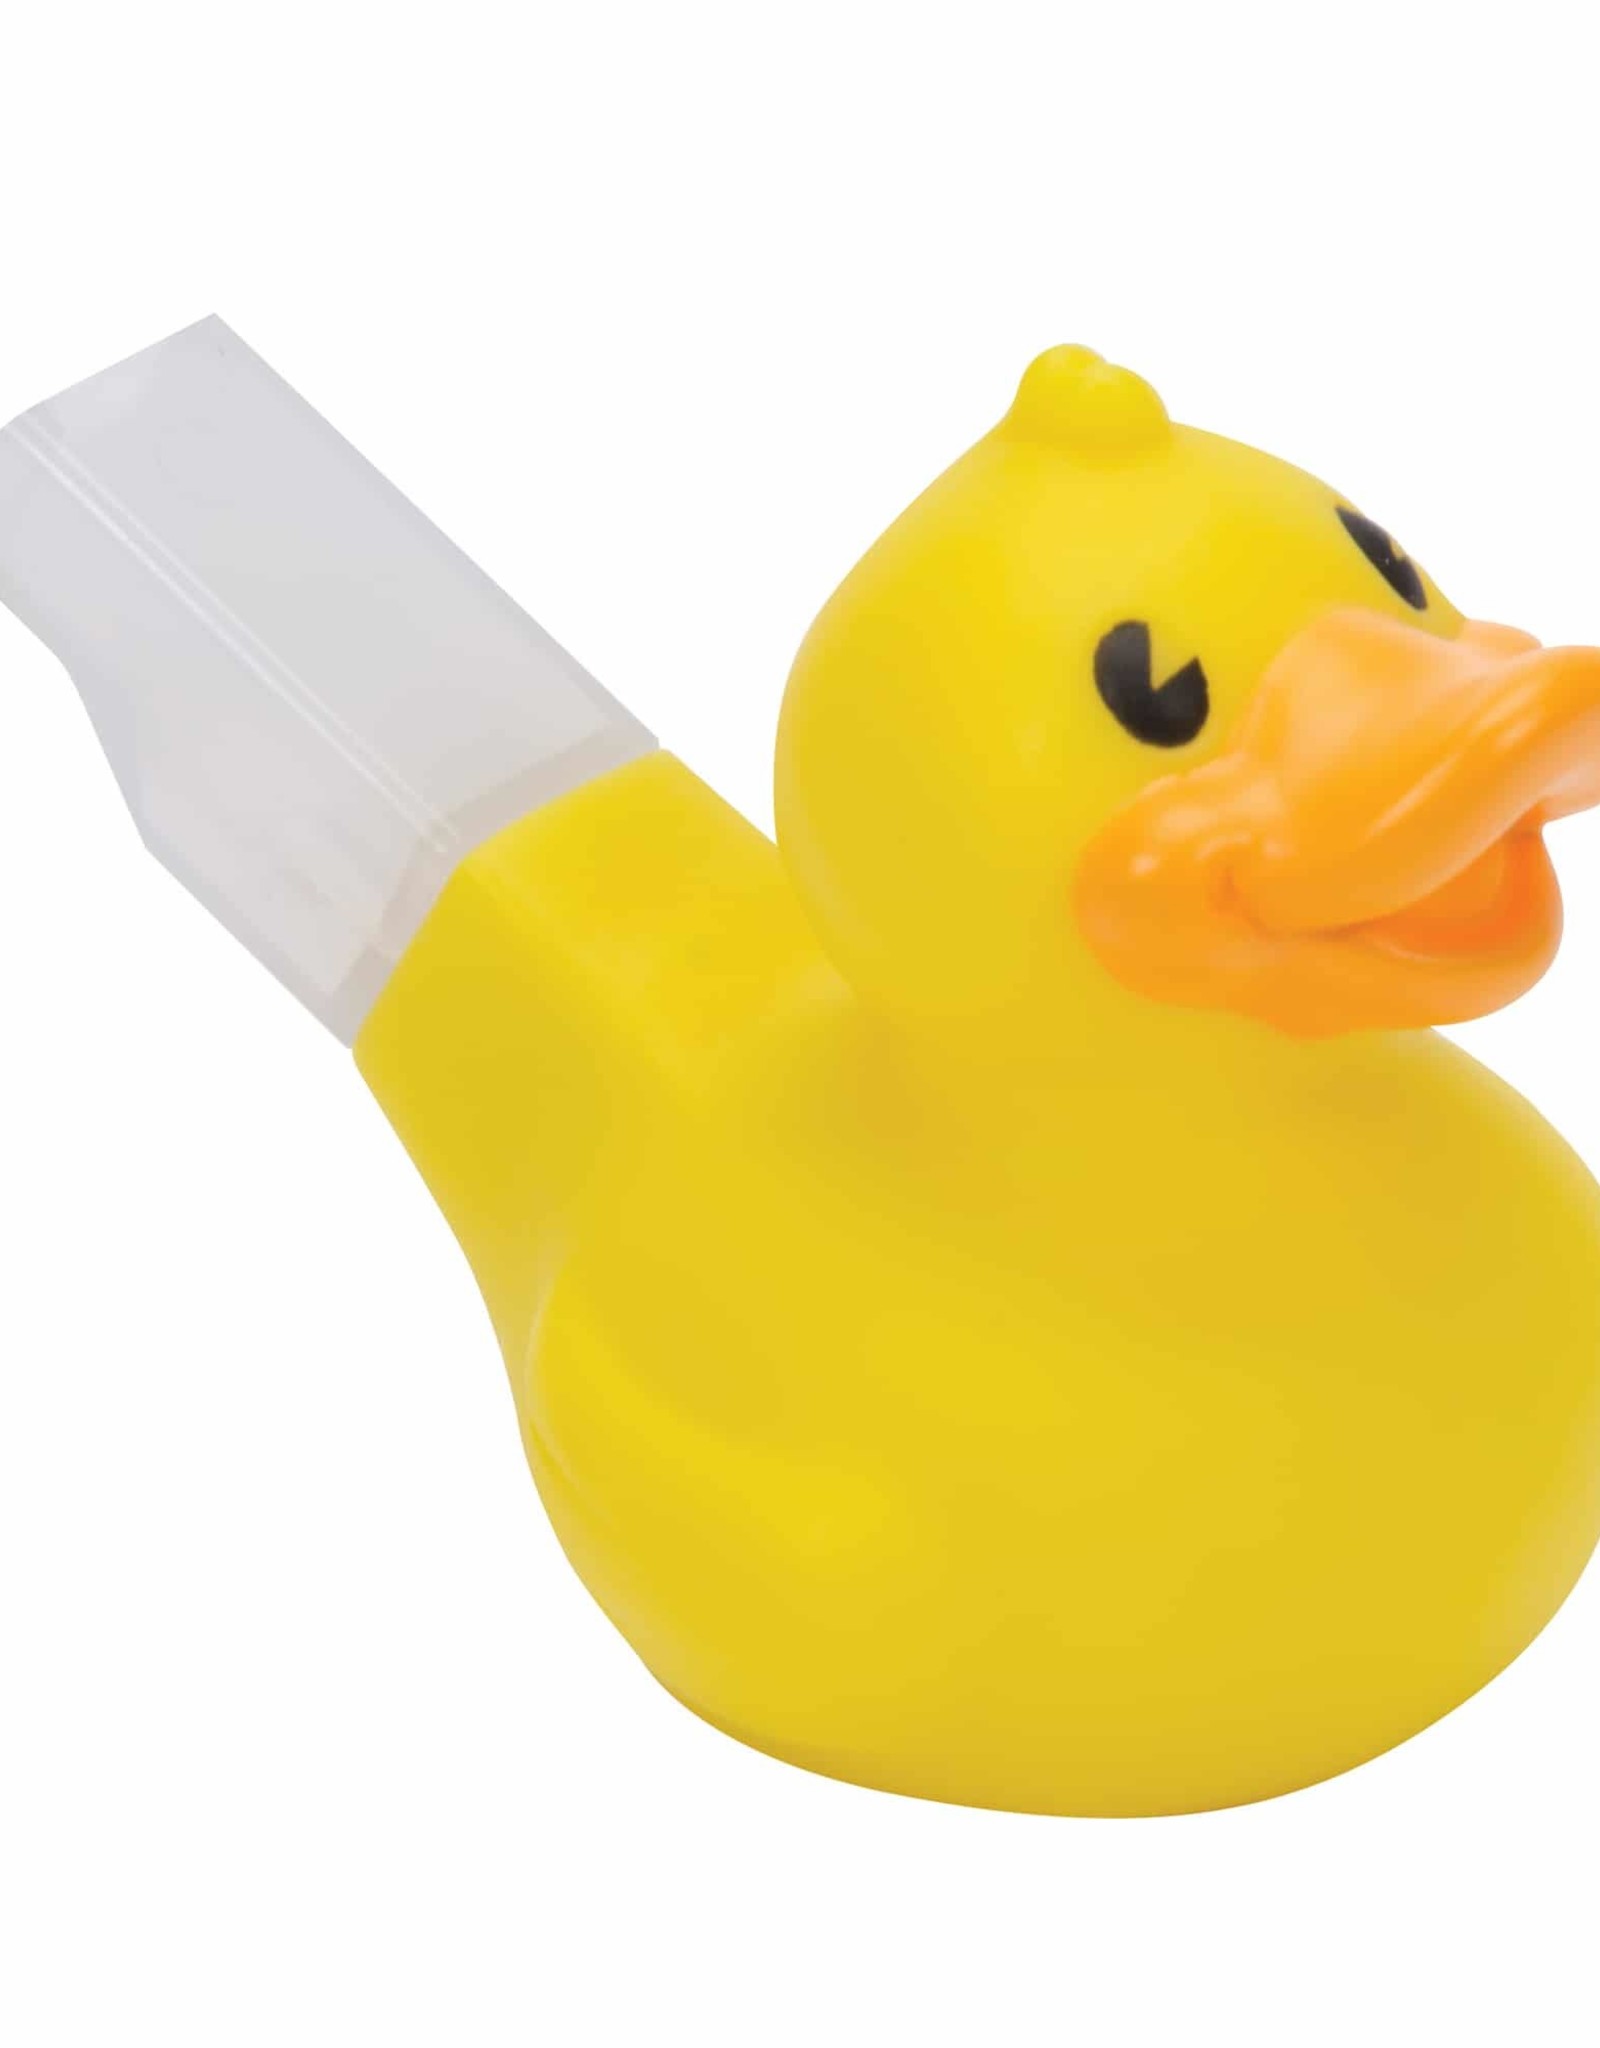 Schylling MINI DUCK WHISTLE